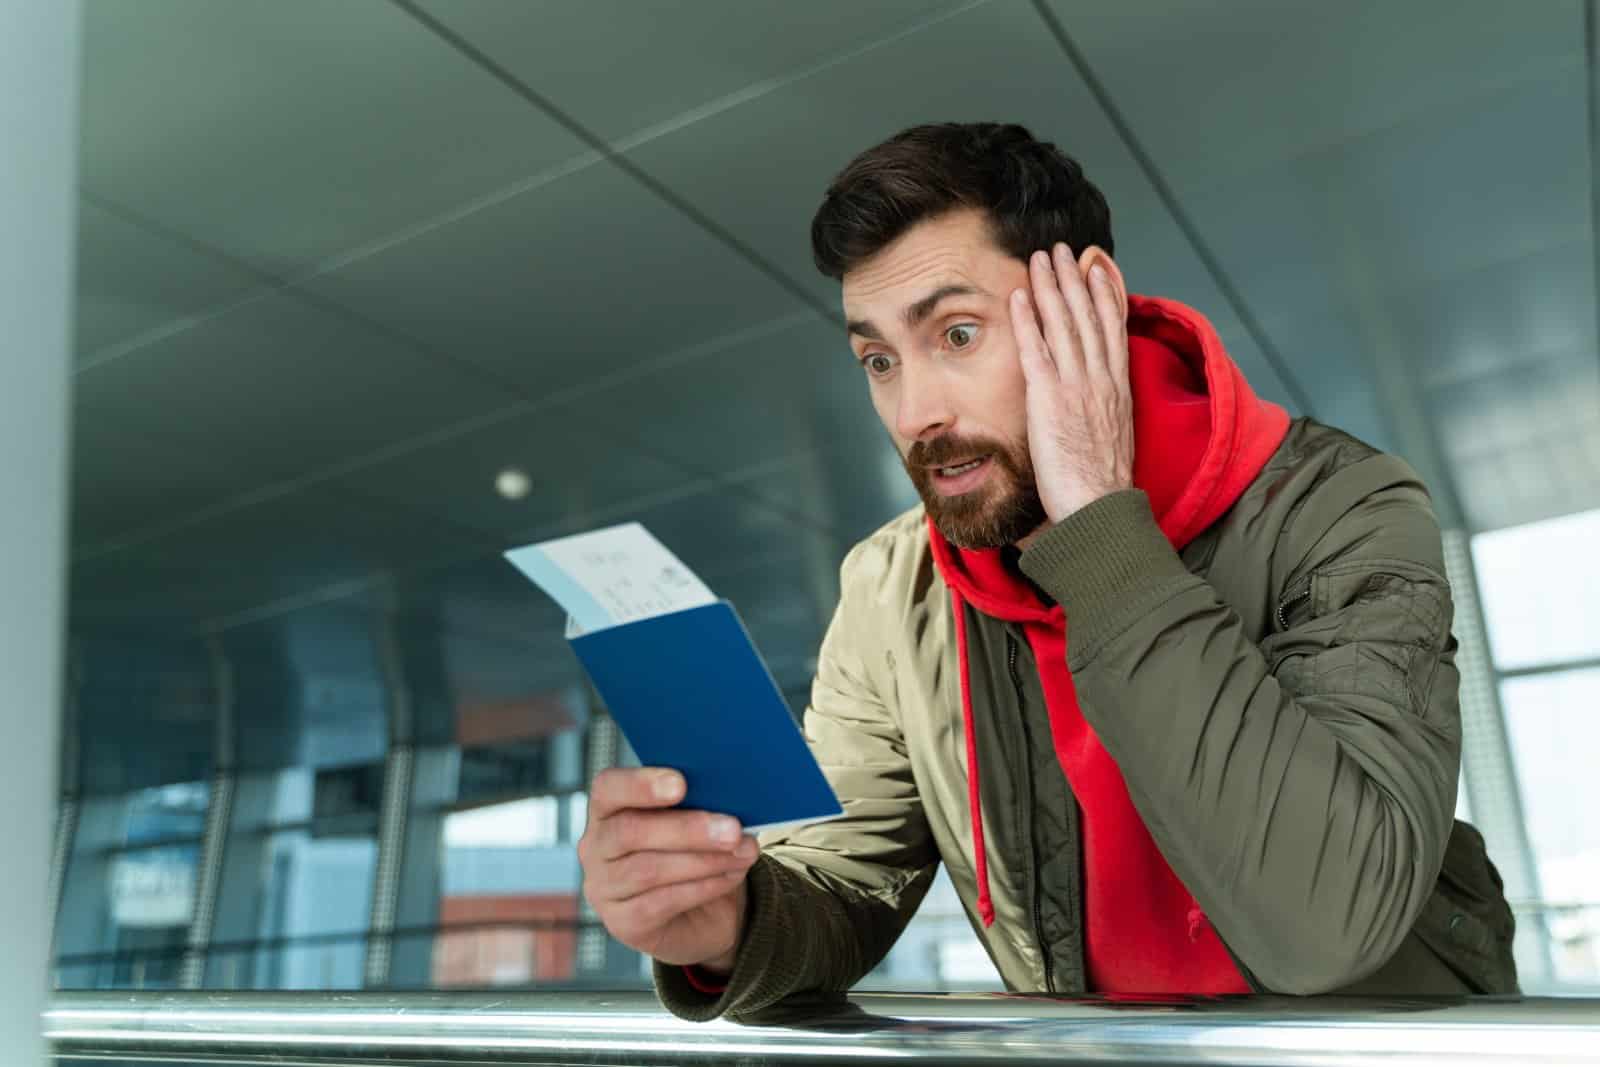 Image Credit: Shutterstock / NFstock <p>Travel insurers will not pay out for losses related to passport validity issues.</p>